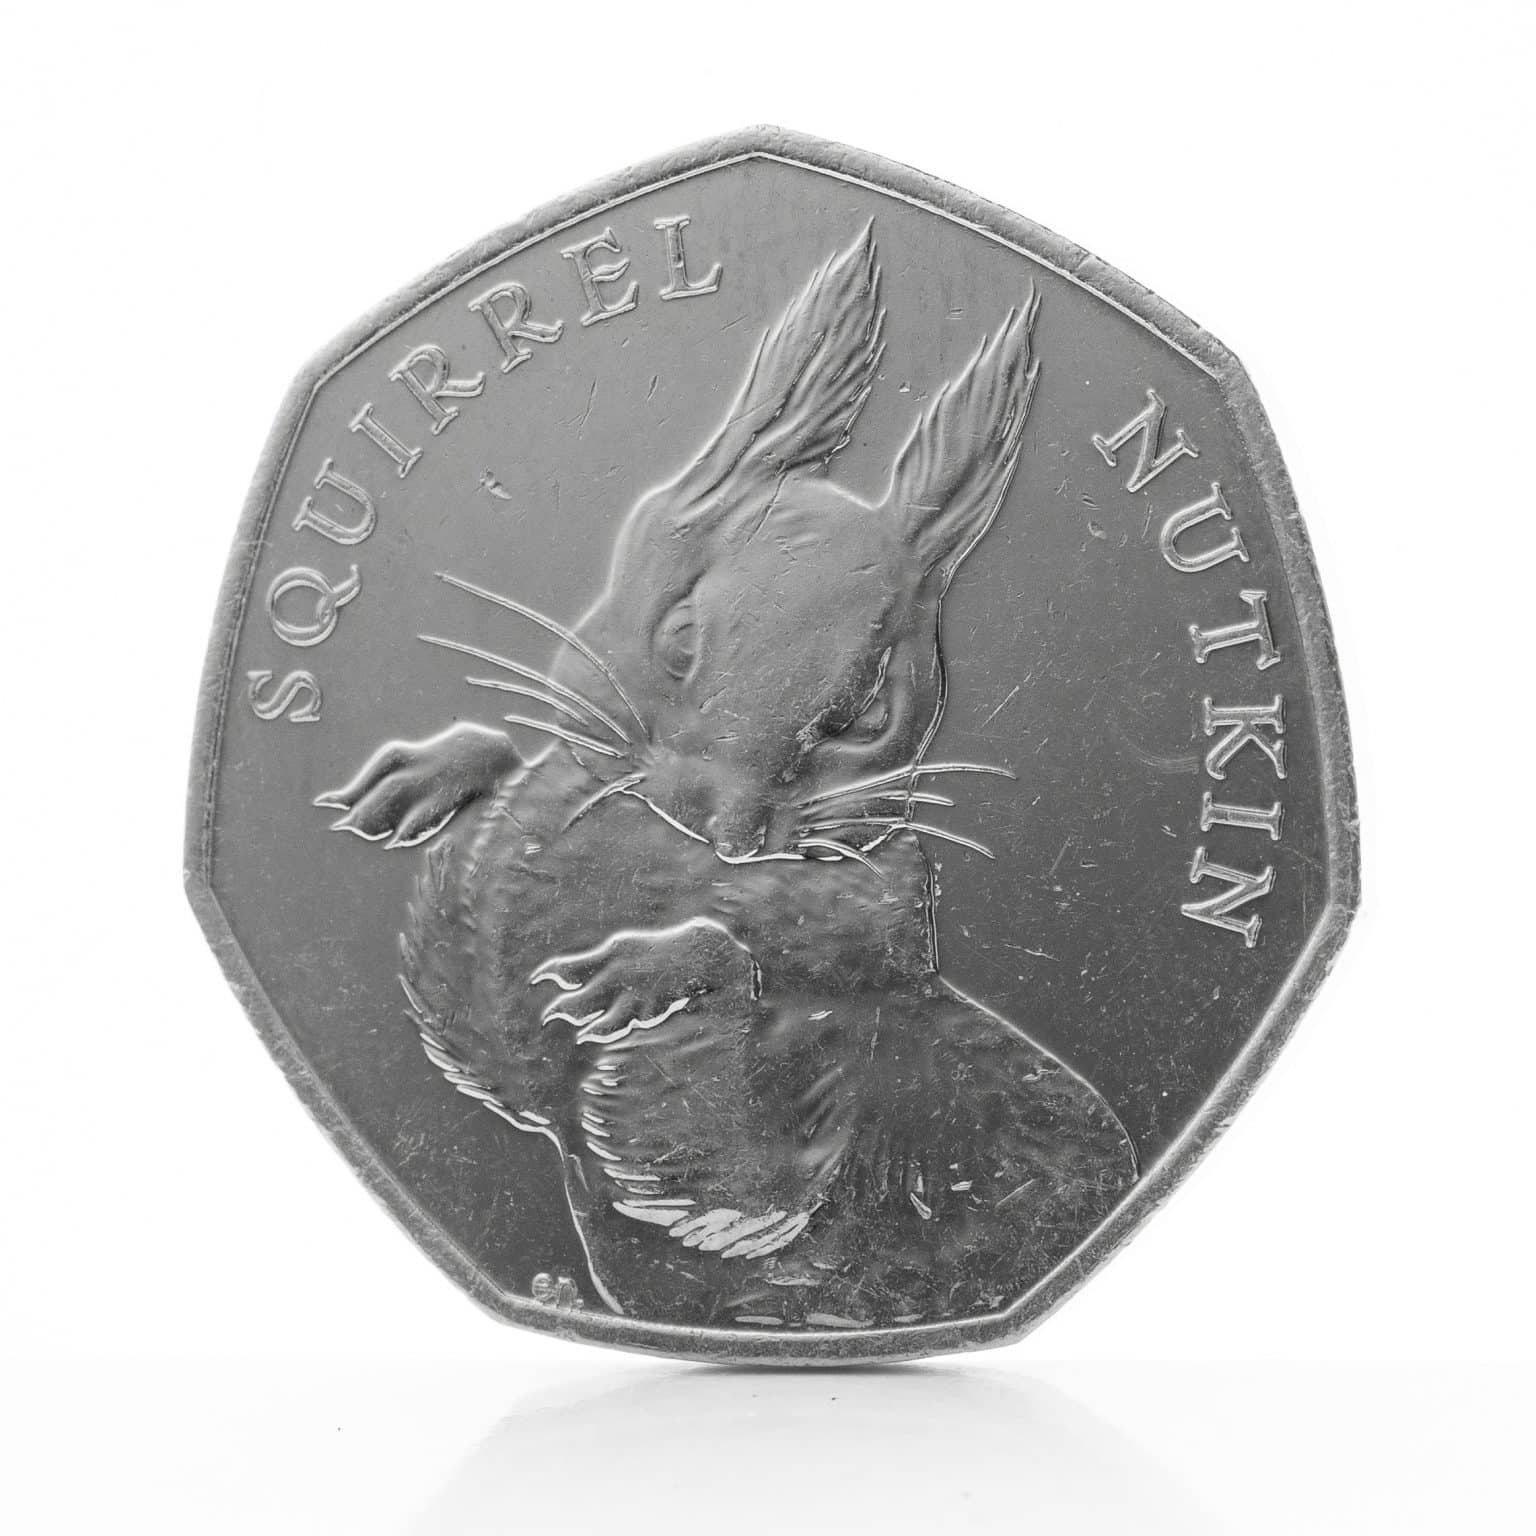 How Worth Is The Squirrel Nutkin 50p? - The Coin Expert